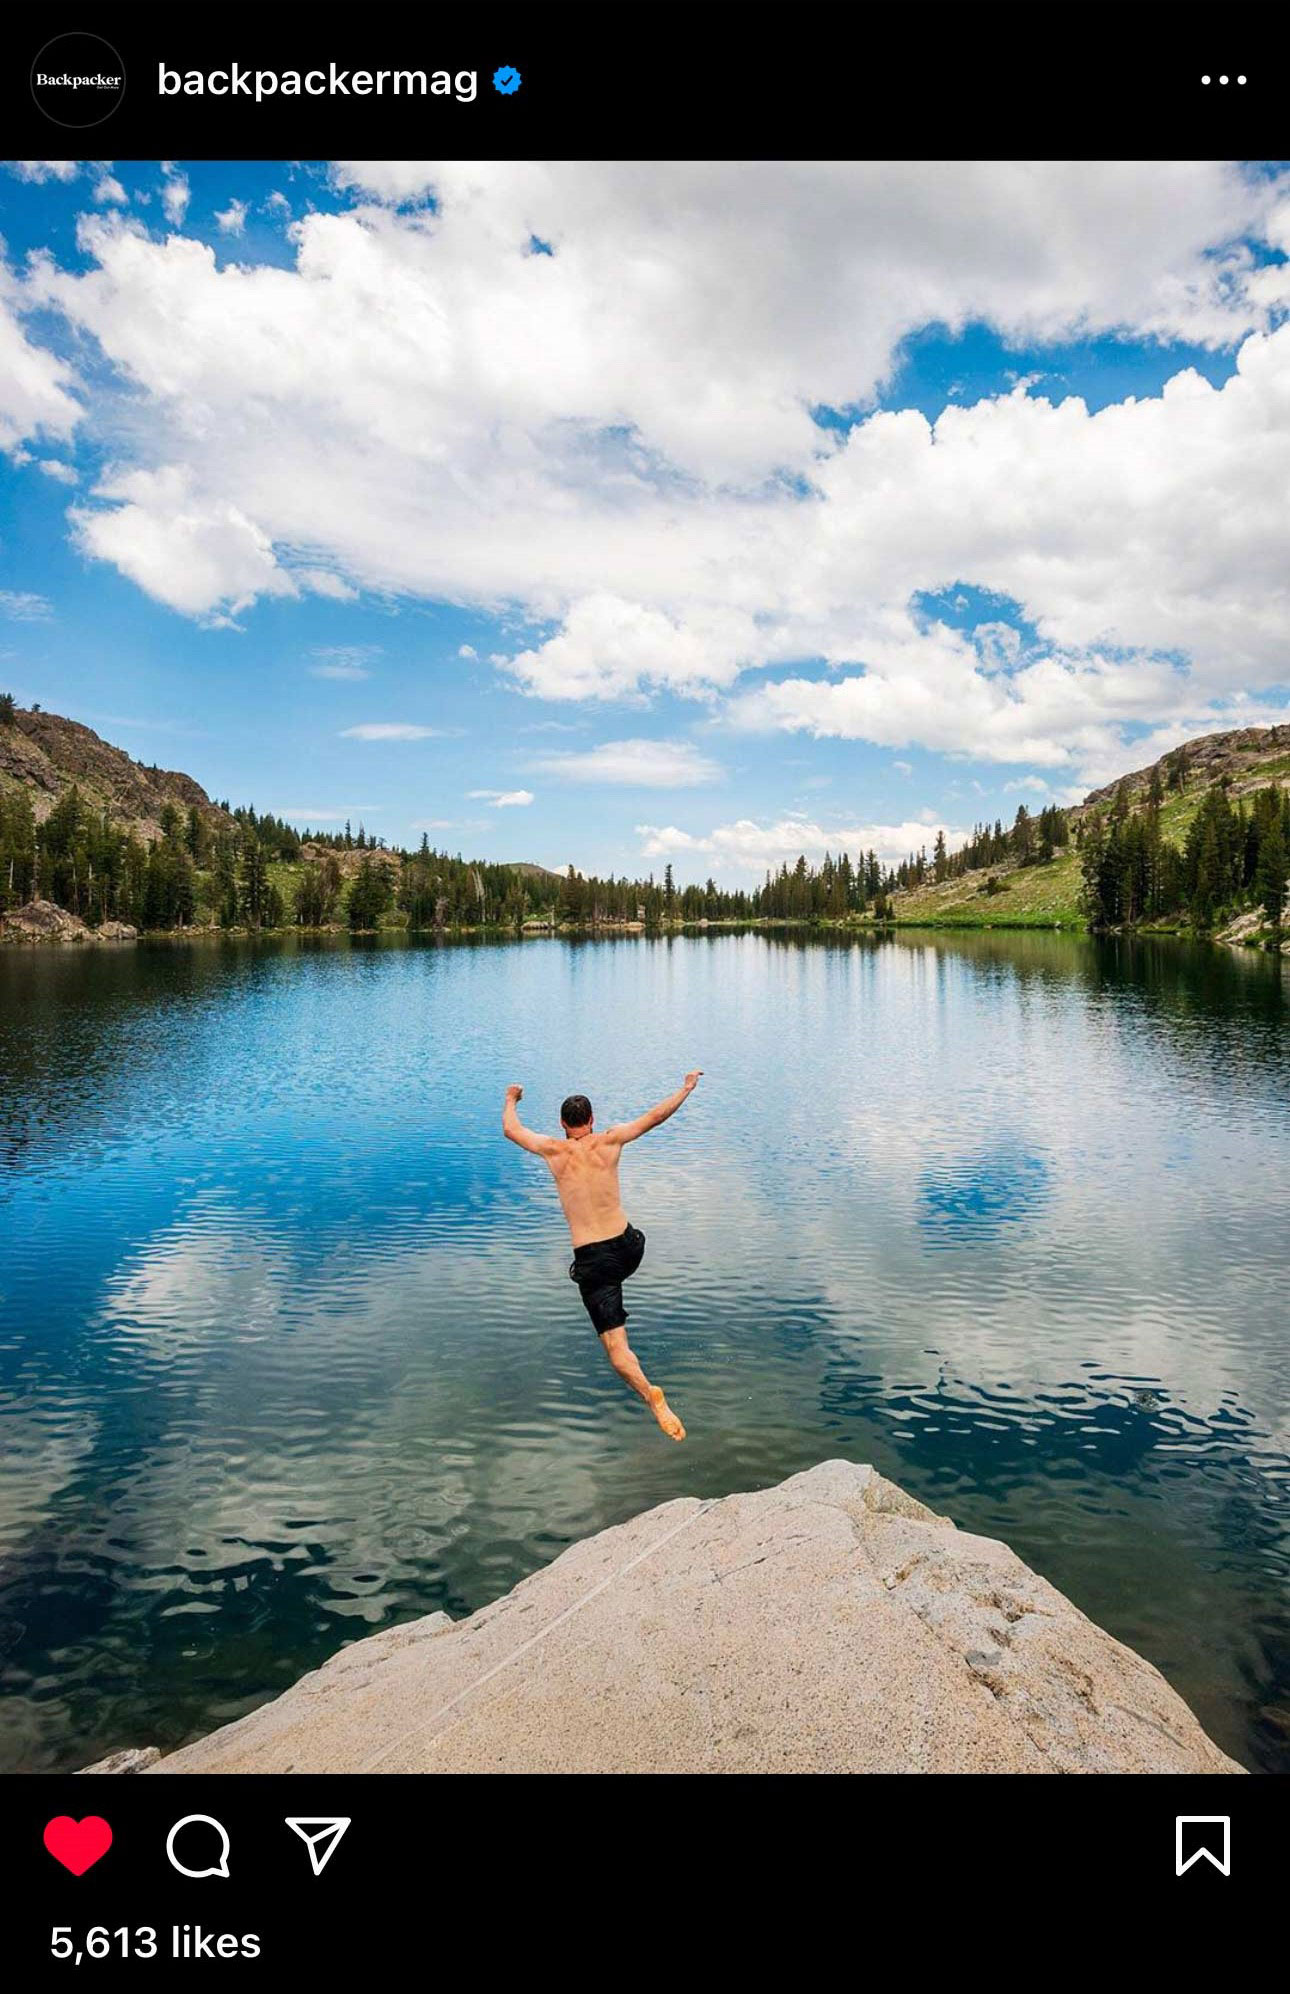 Jumping into a lake for Backpacker Magazine.